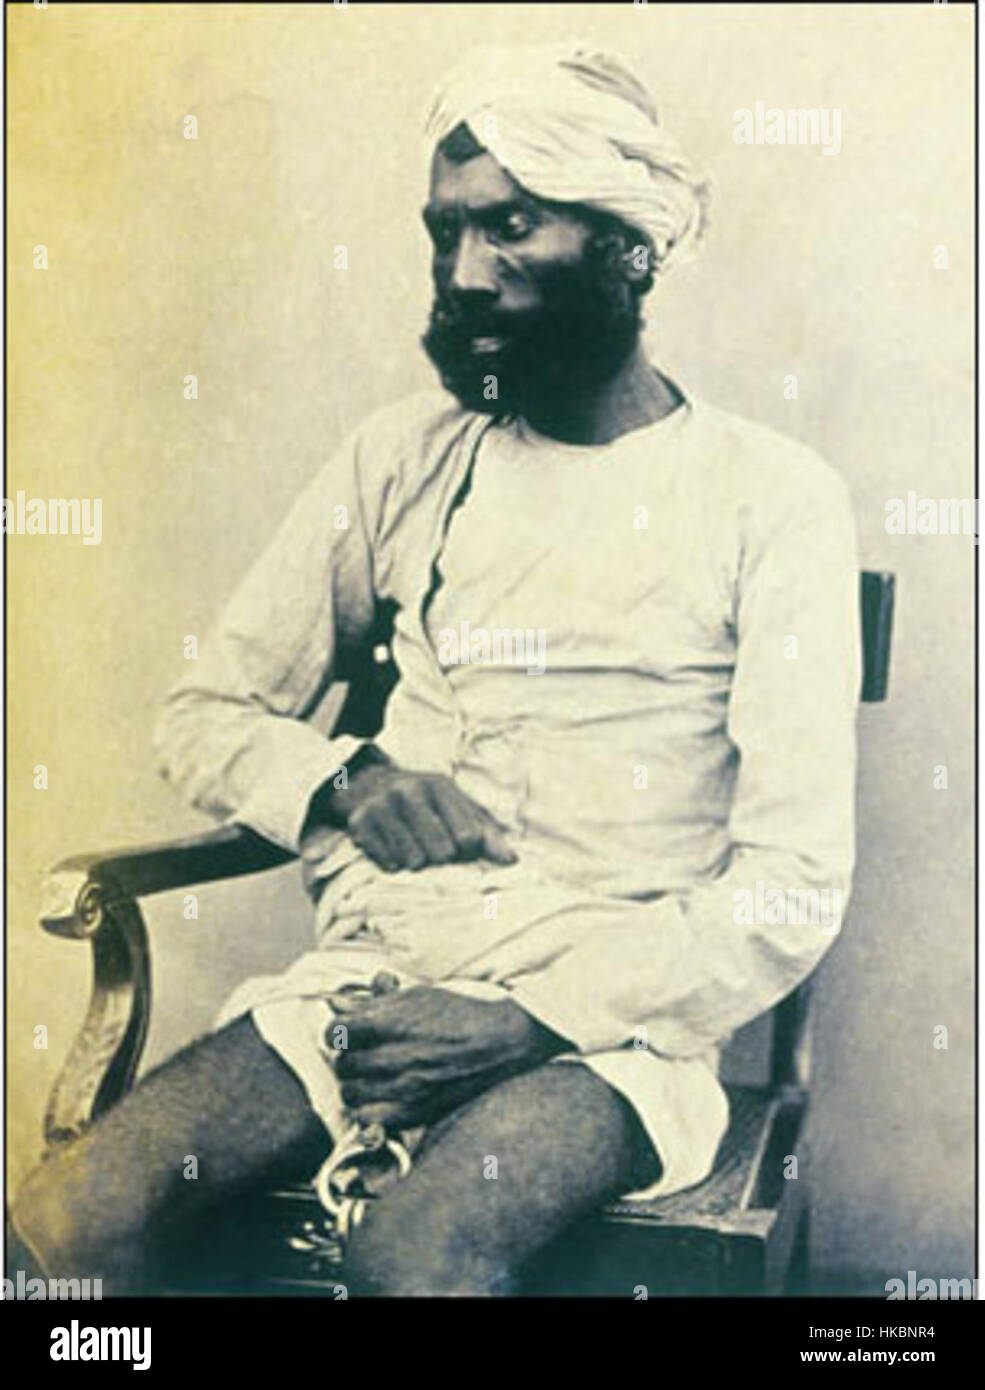 A hand written caption identifies the man as Gungoo Mehter who was tried at Kanpur for killing many of the Sati Chaura survivors, including many women and children. He was convicted and hanged at Kanpur on 8 September 1859. Stock Photo